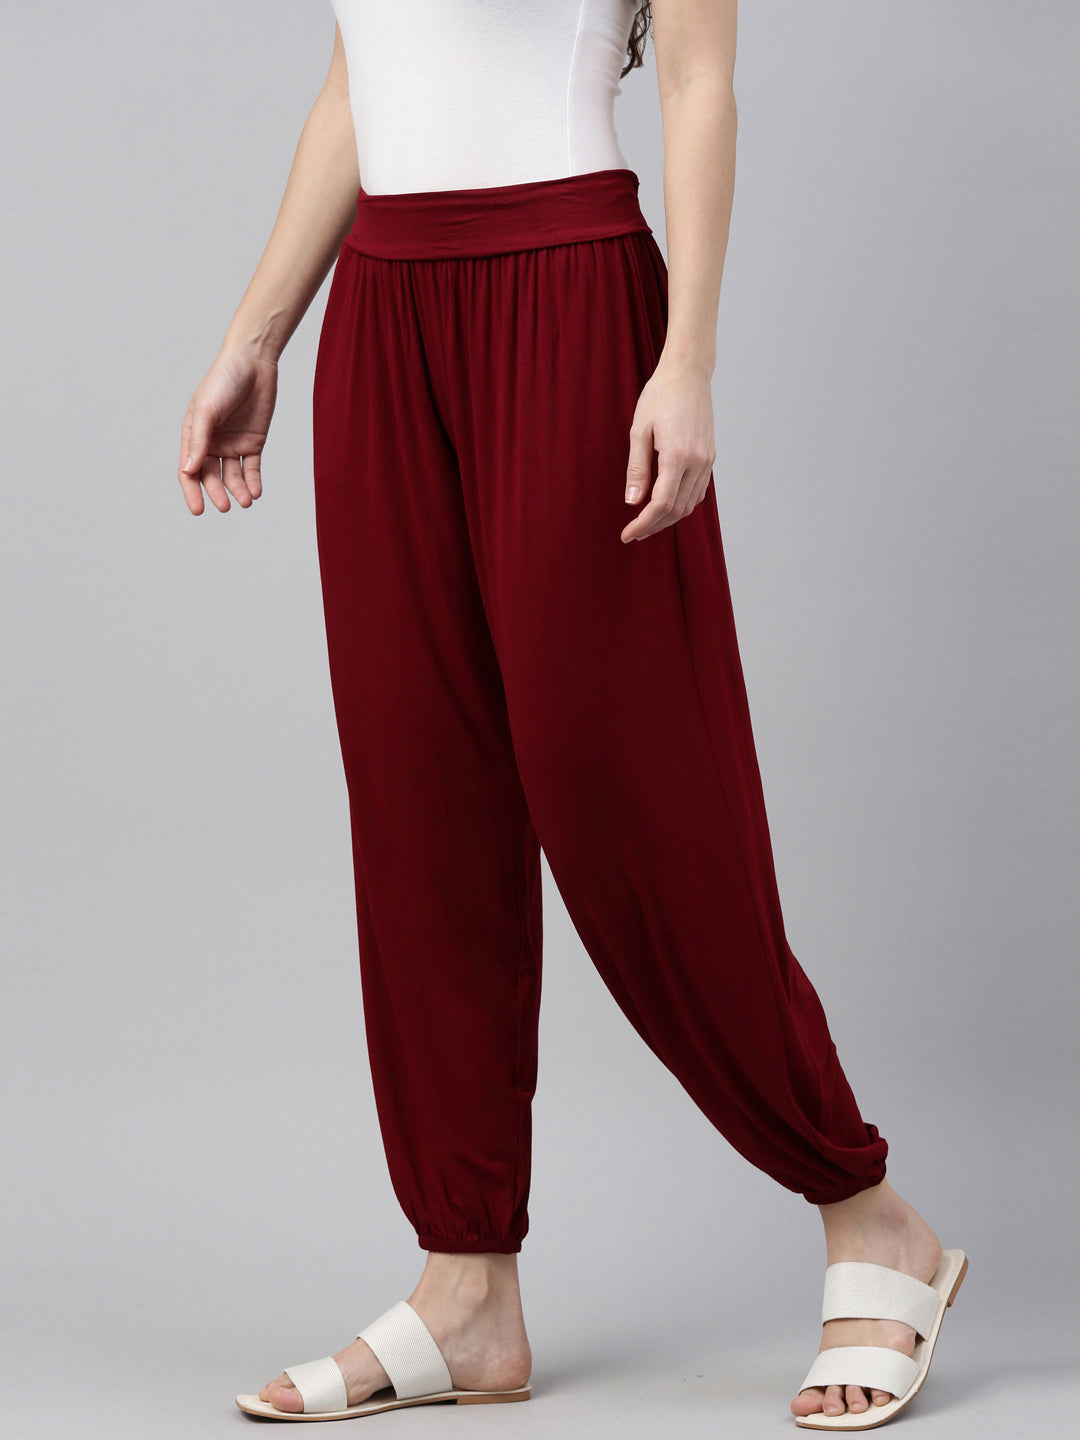 Buy Harem Pants For Women In India – Unmade